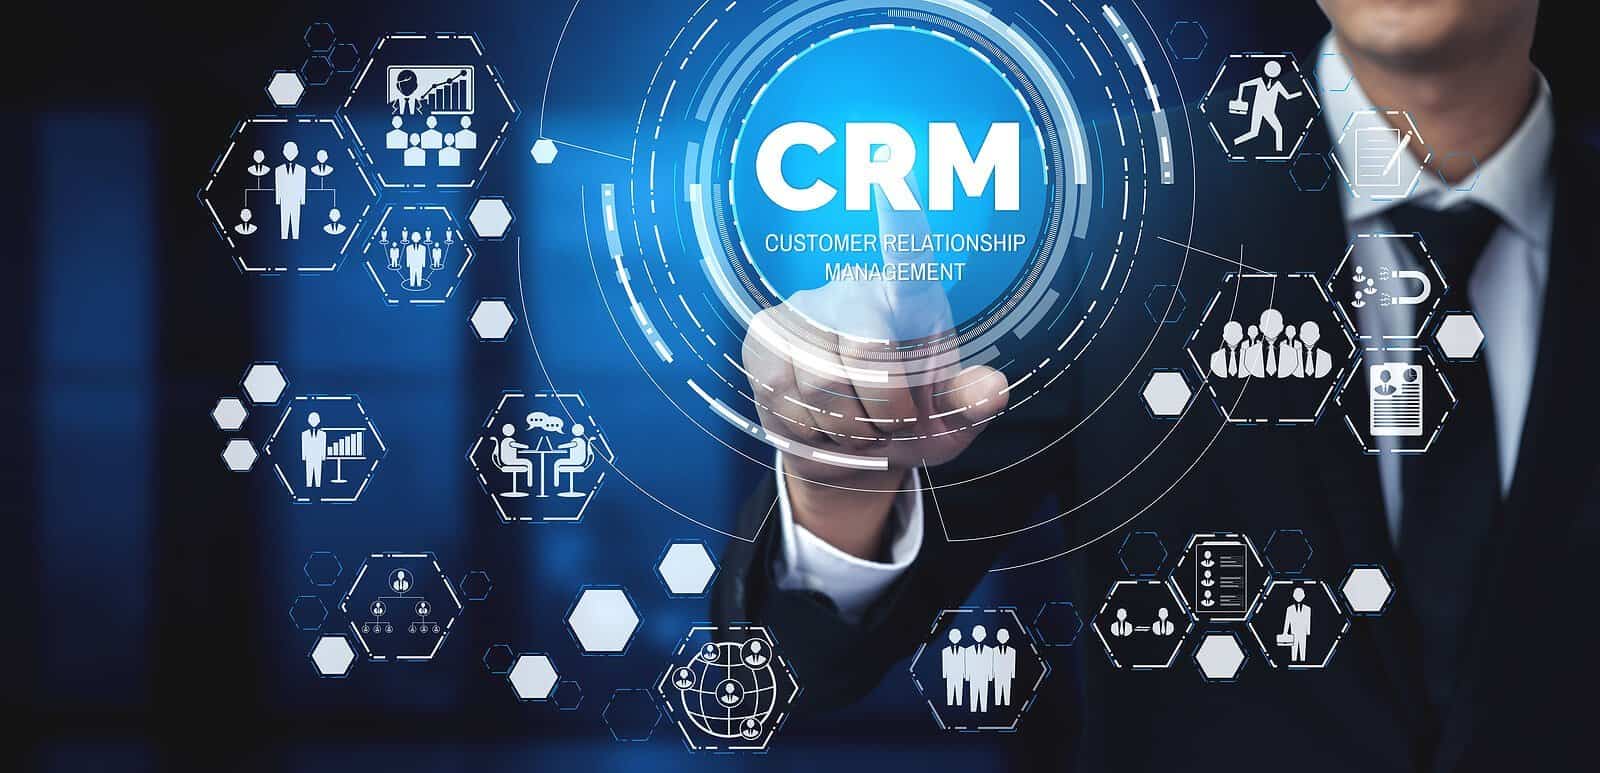 CRM Cloud-Based Solutions